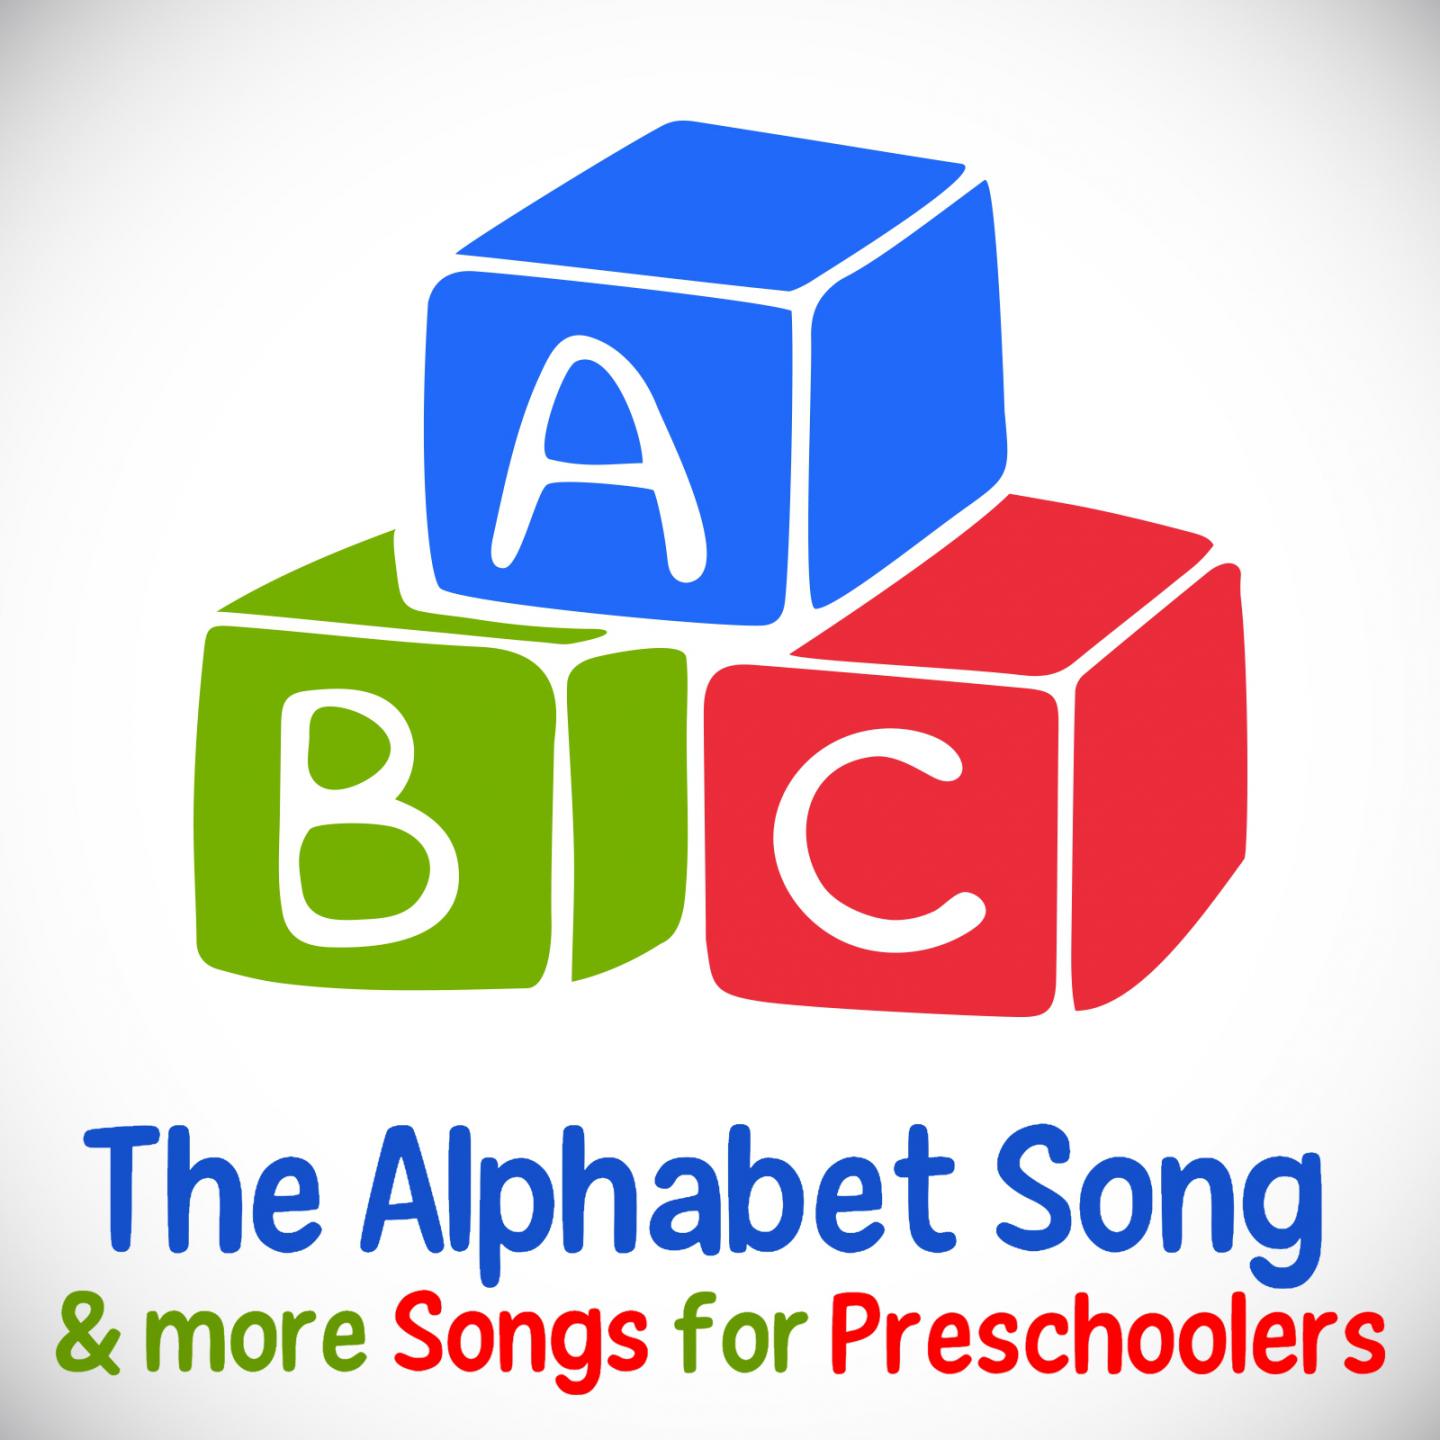 ABC (The Alphabet Song) & more Songs for Preschoolers